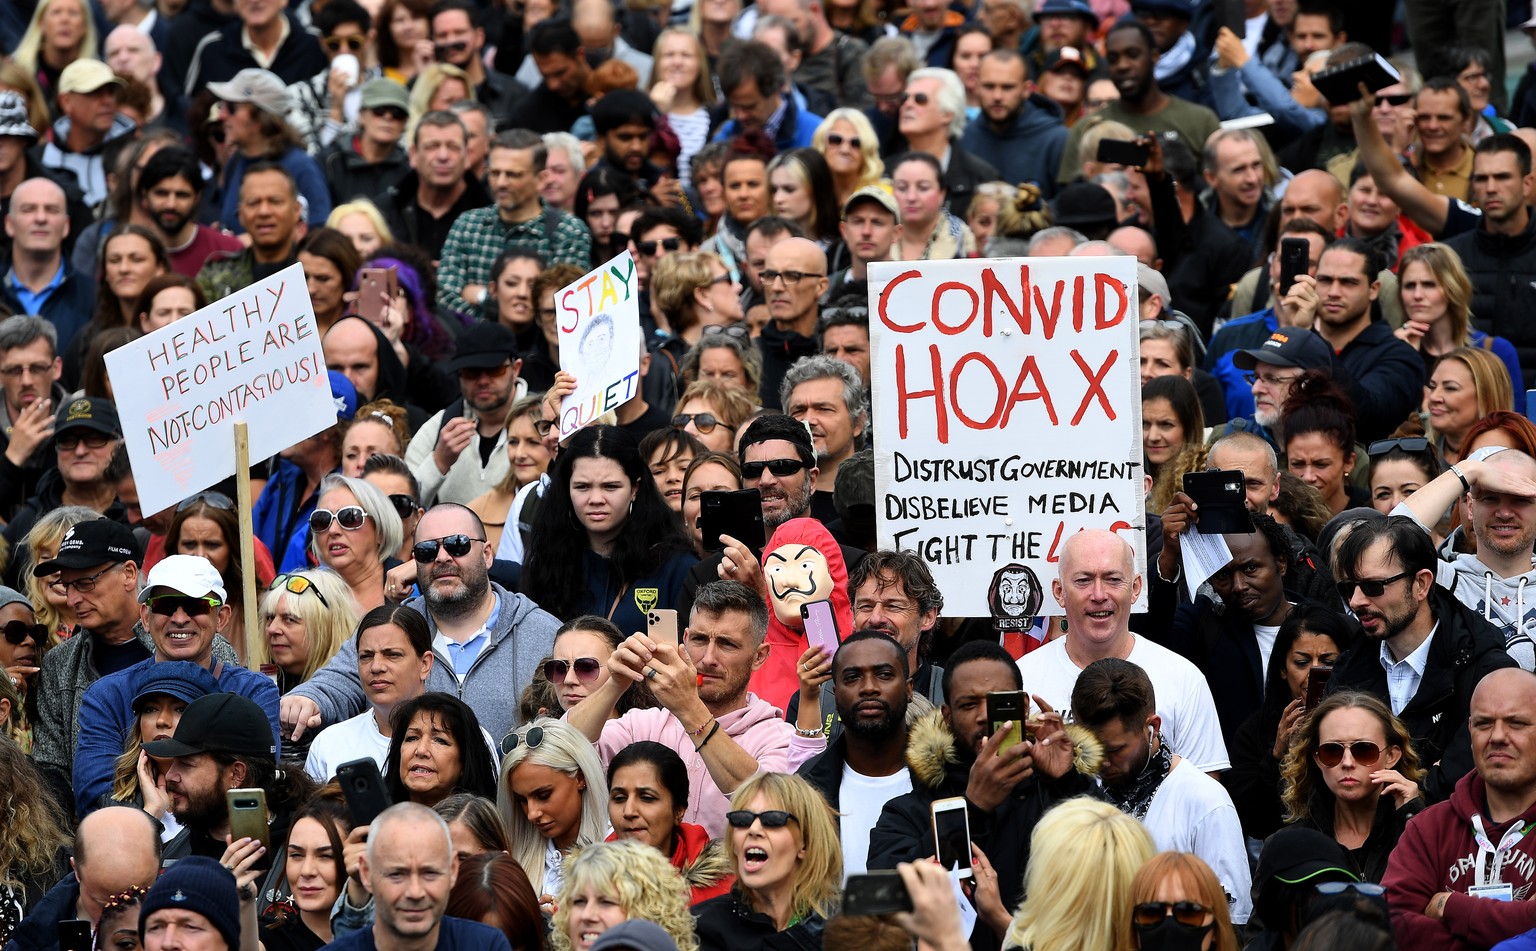 epa08633429 Thousands of people protest at Trafalgar Square against the Coronavirus lockdown in London, Britain, 29 August 2020. Protesters demonstrated against the wearing of masks, government propos ...